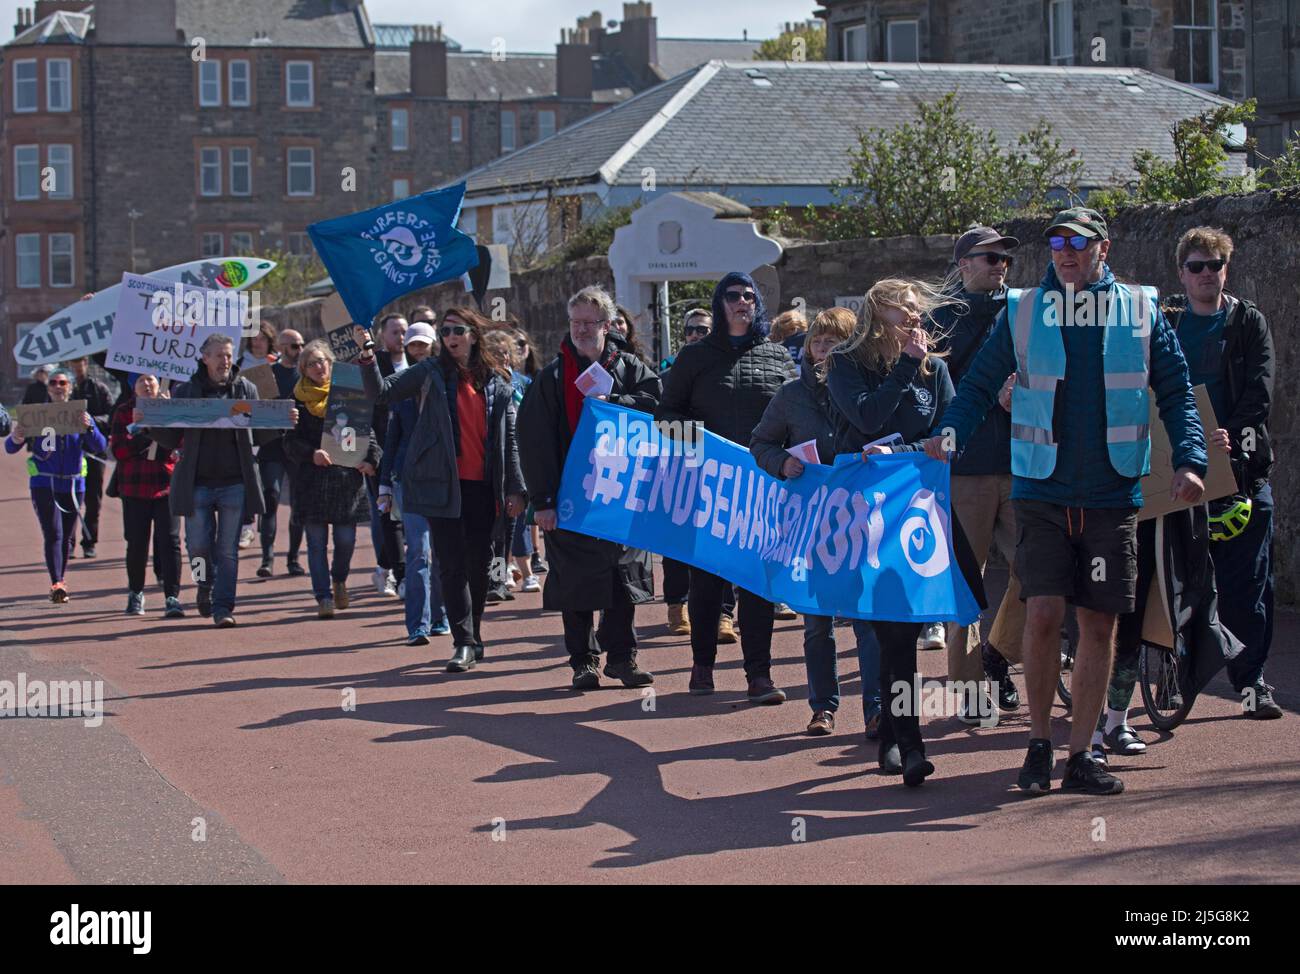 Portobello, Edinburgh, Scotland, UK. 23rd April 2022. End Sewage Pollution protest, people of all ages came together  protesting against Scottish Water to demand they end sewage pollution. Including Surfer's against sewage, anyone with a love for the ocean or the rivers was invited. The group marched peacfully from the Seafield end of the promenade up Kings Road along the Portobello High Street eventually cutting back to the east end of the promenade. Credit: Archwhite/alamy live news Stock Photo